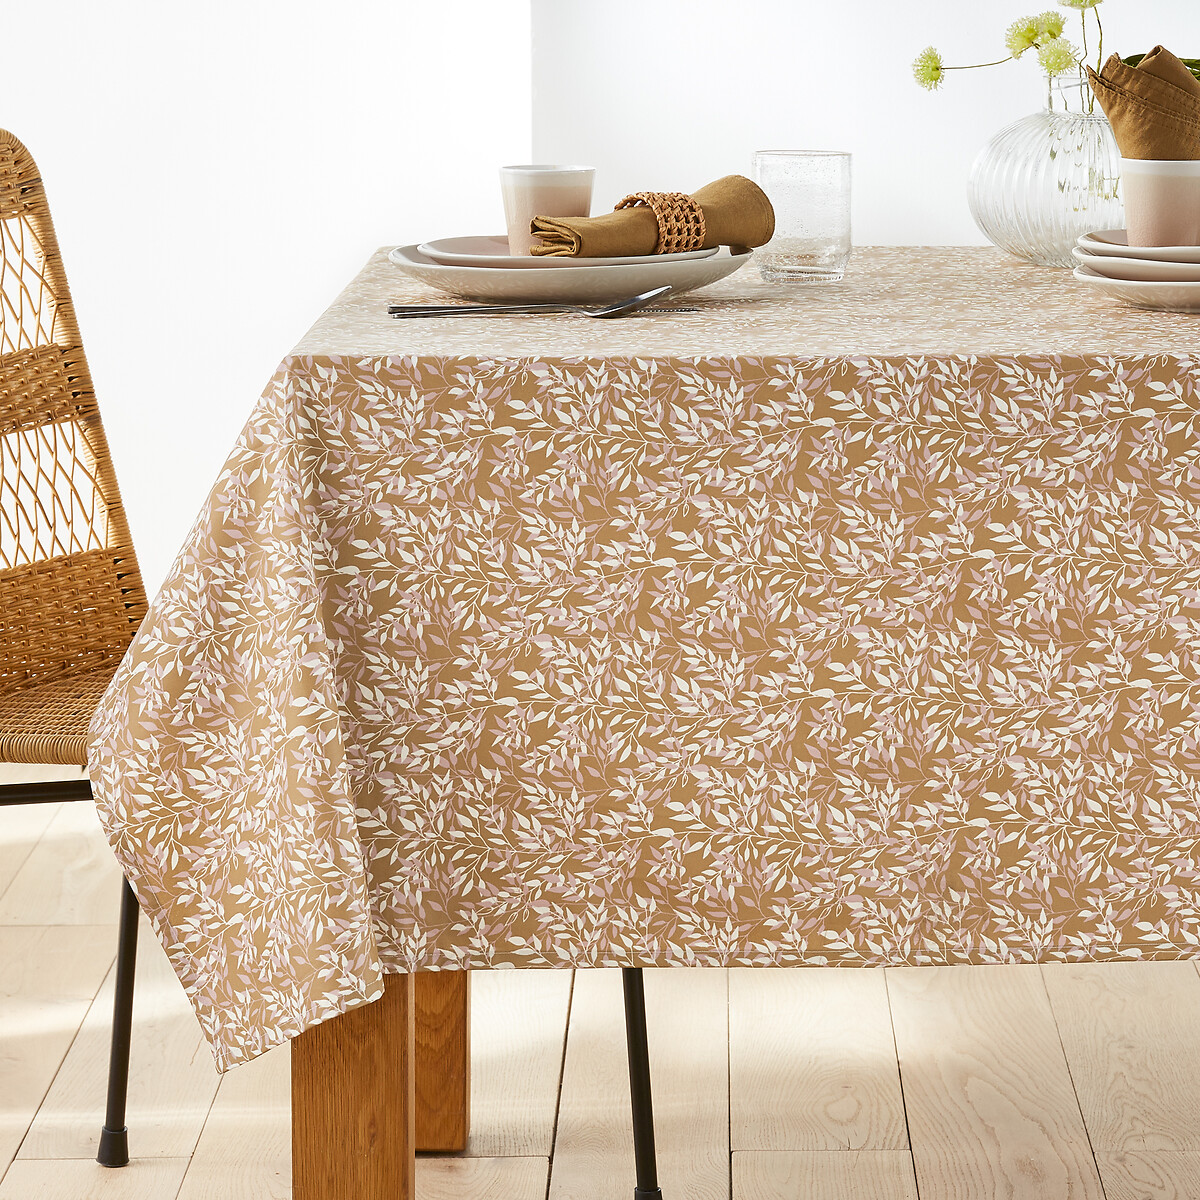 Nara Olive Oilcloth Type 100% Cotton Tablecloth